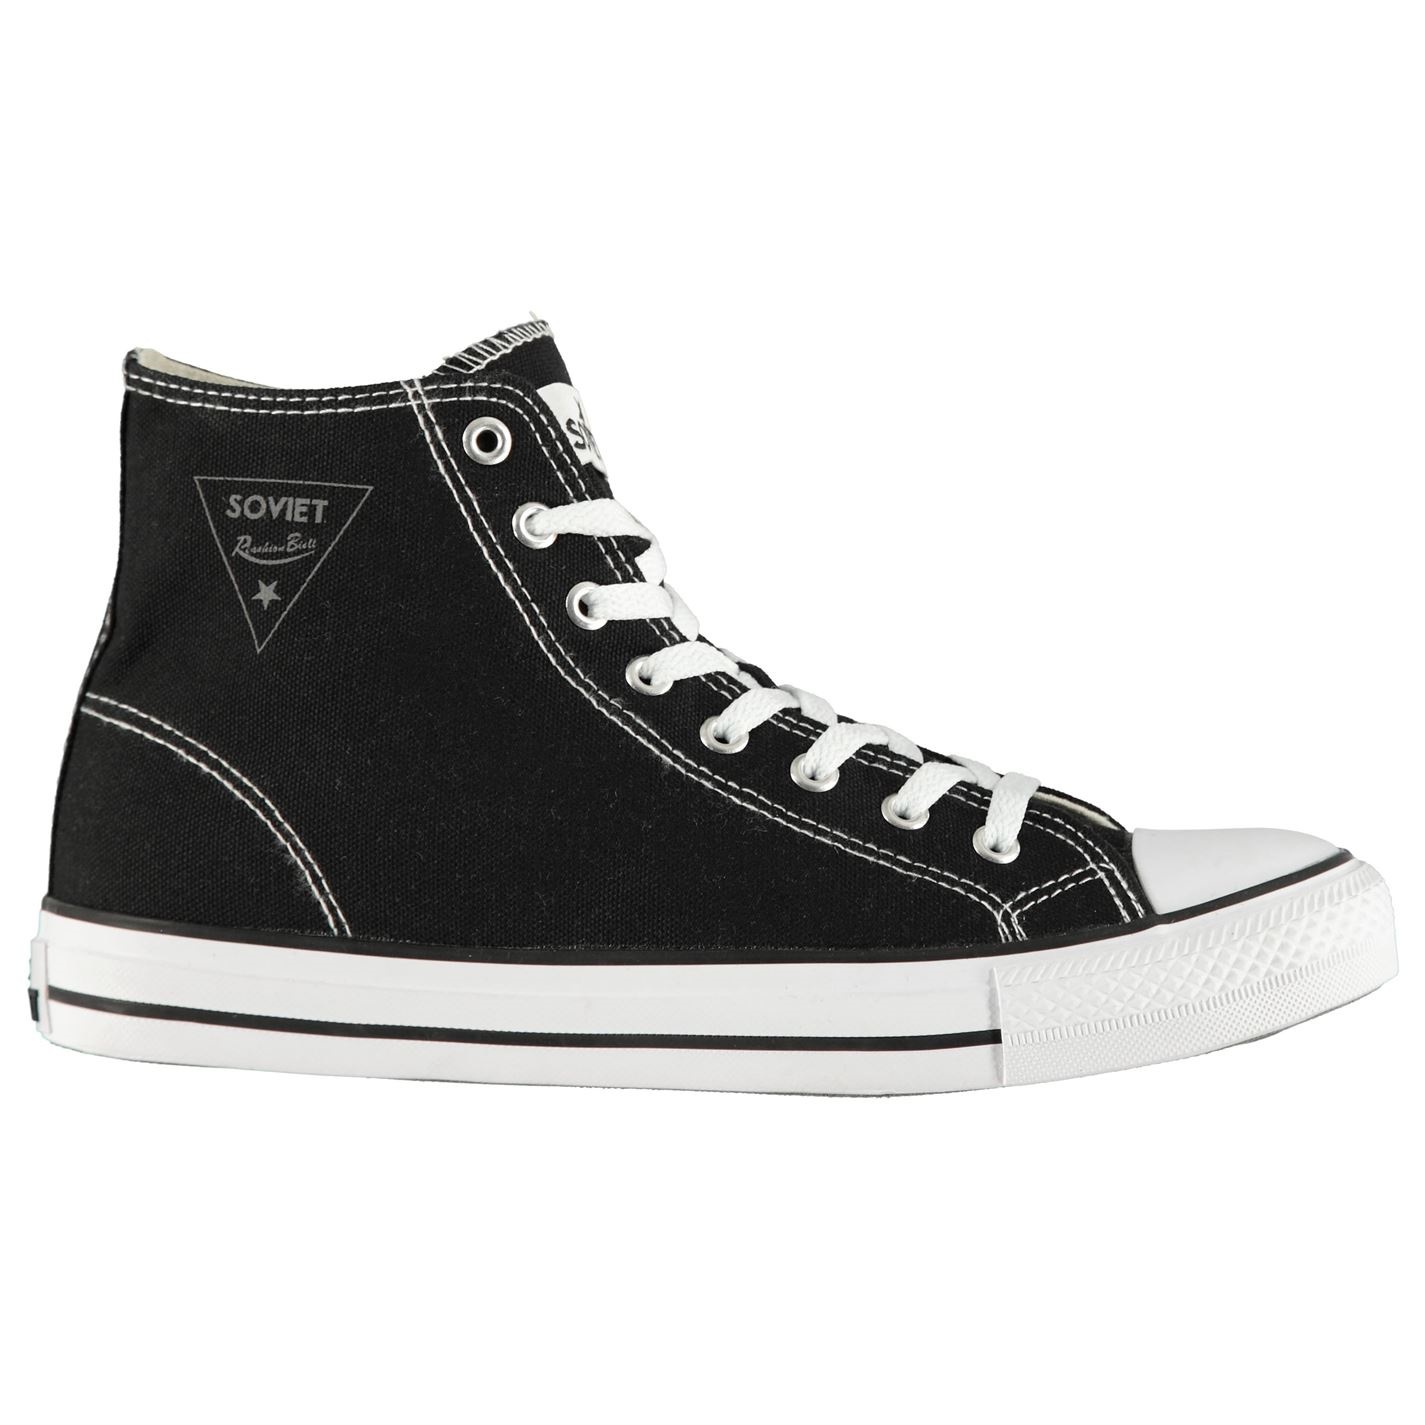 Mens Dave Hi Canvas Trainers Sneakers 